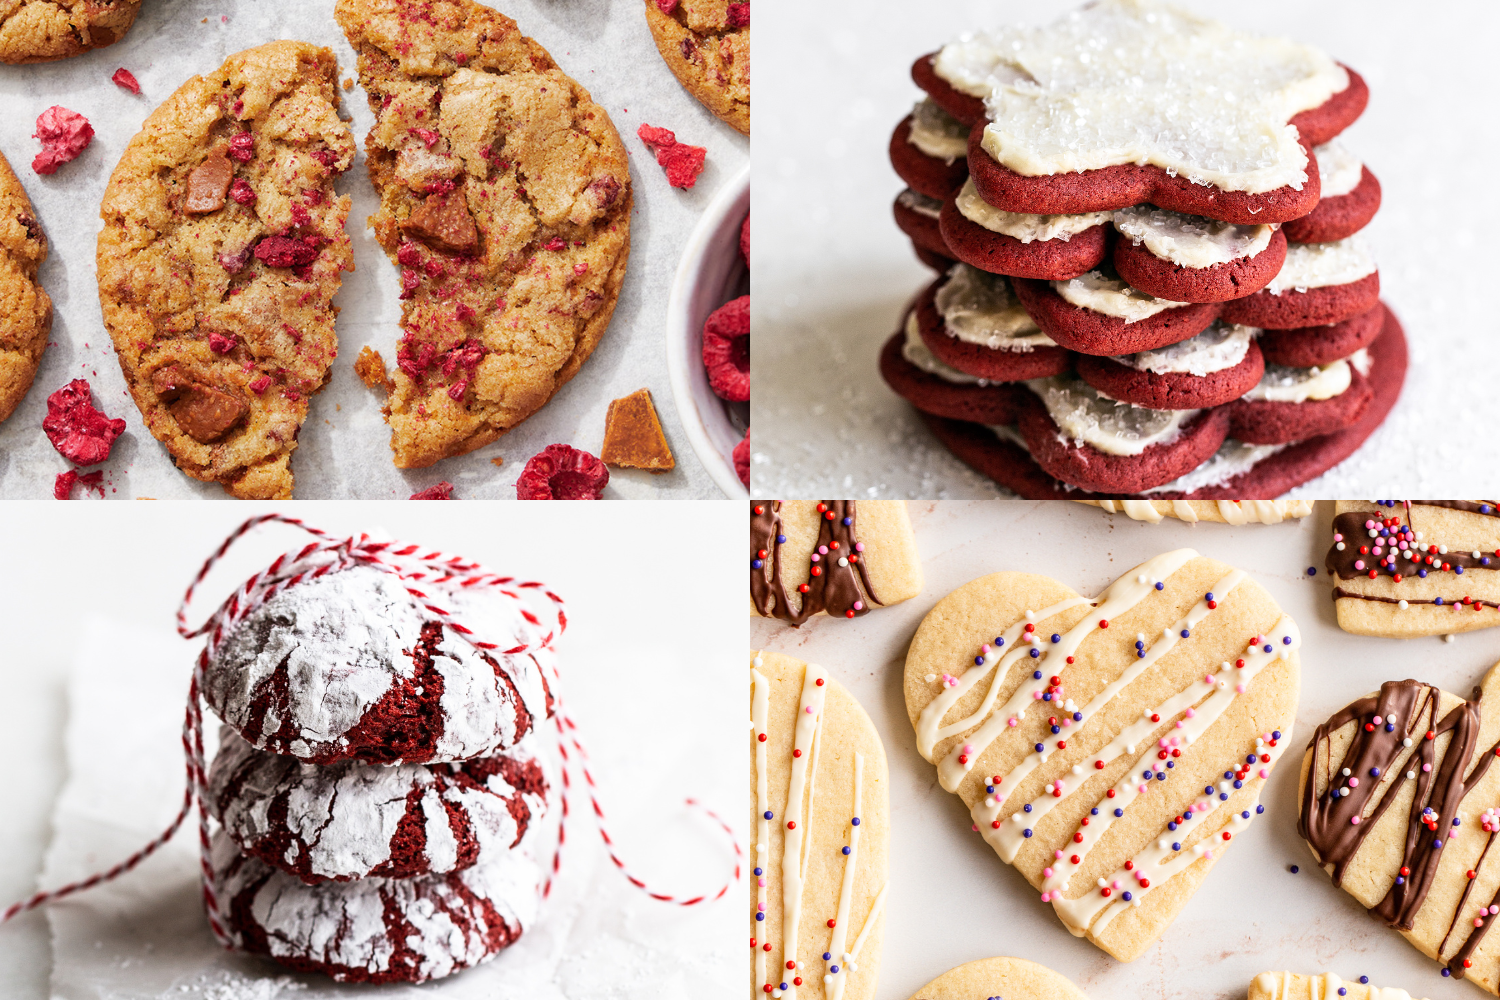 four cookie images: caramelized white chocolate raspberry cookies, next to a stack of red velvet cut-out cookies with cream cheese frosting, above a stack of red velvet crinkle cookies, next to several heart-shaped cut-out sugar cookies drizzled with white chocolate and topped with sprinkles.